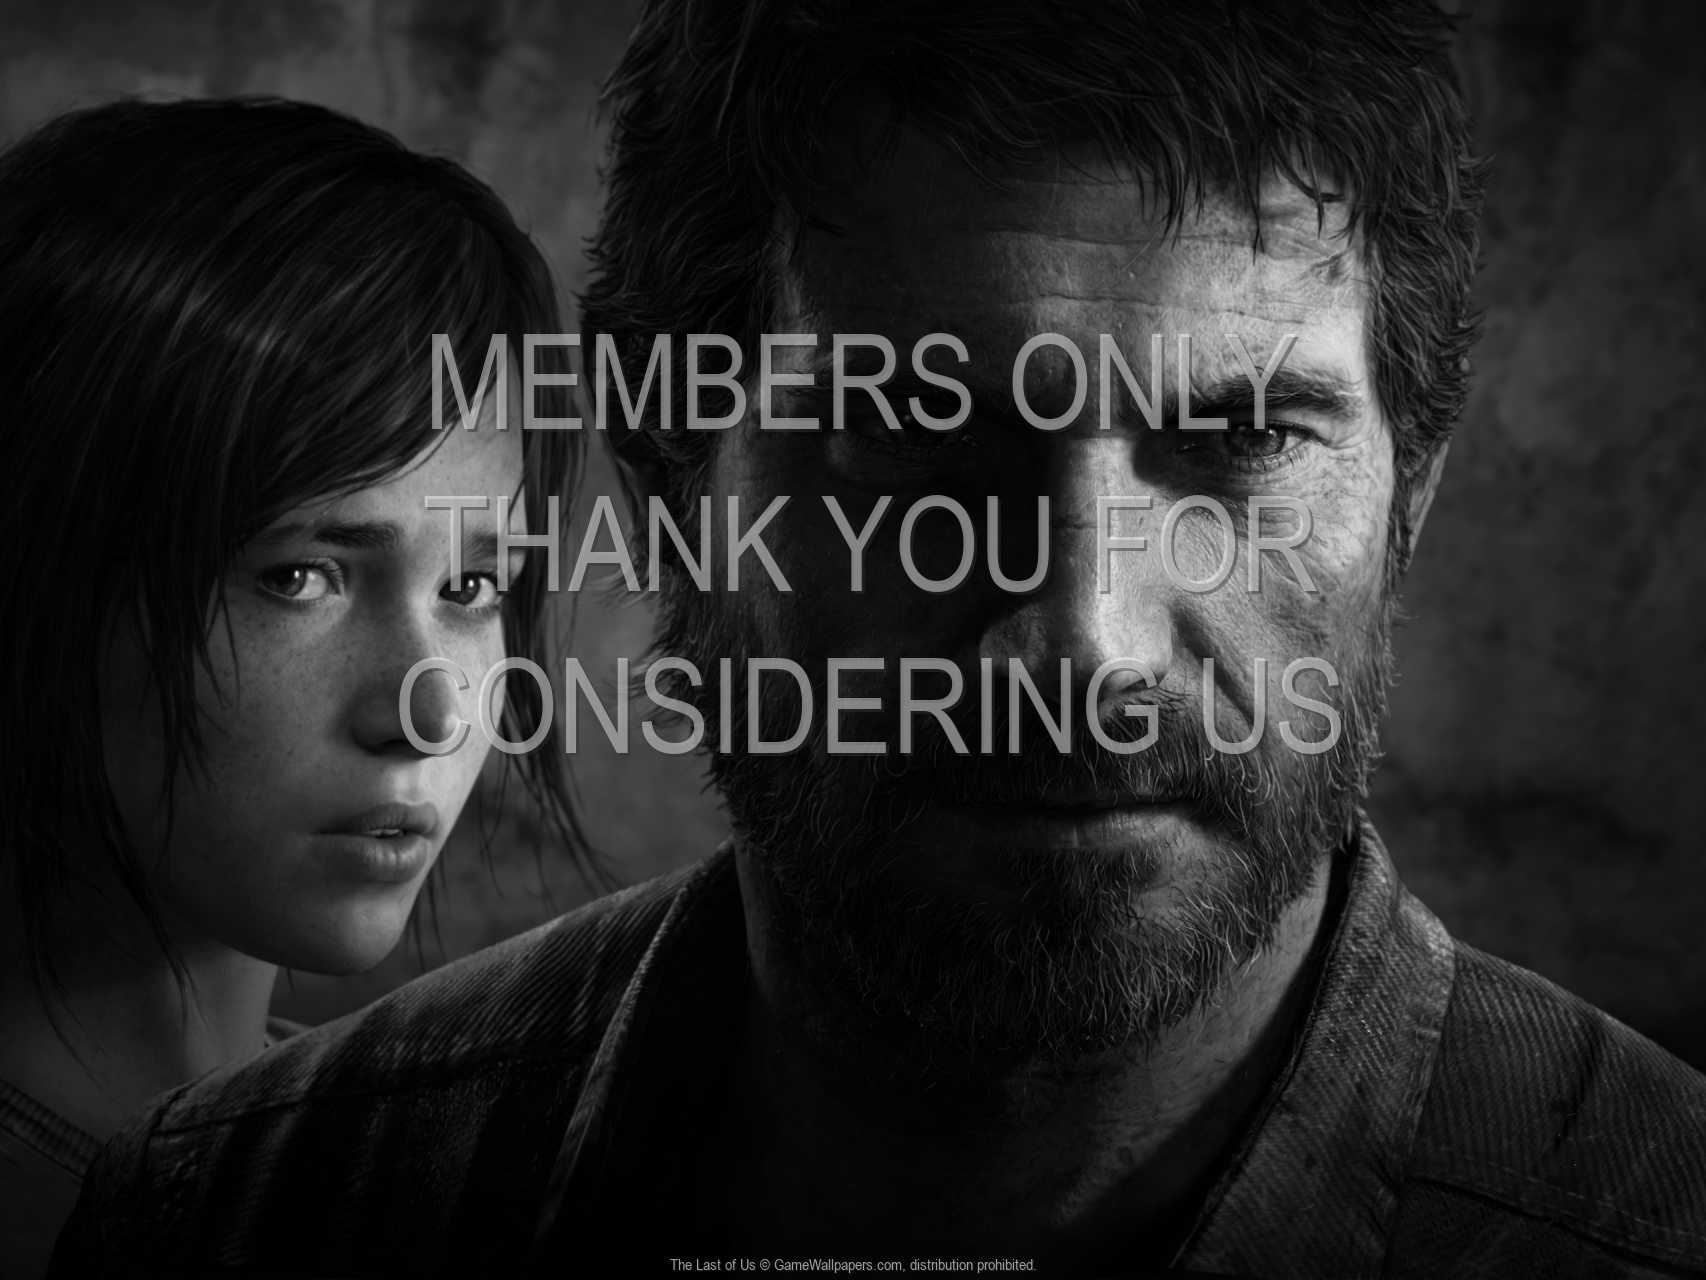 The Last of Us 720p%20Horizontal Mobile wallpaper or background 04